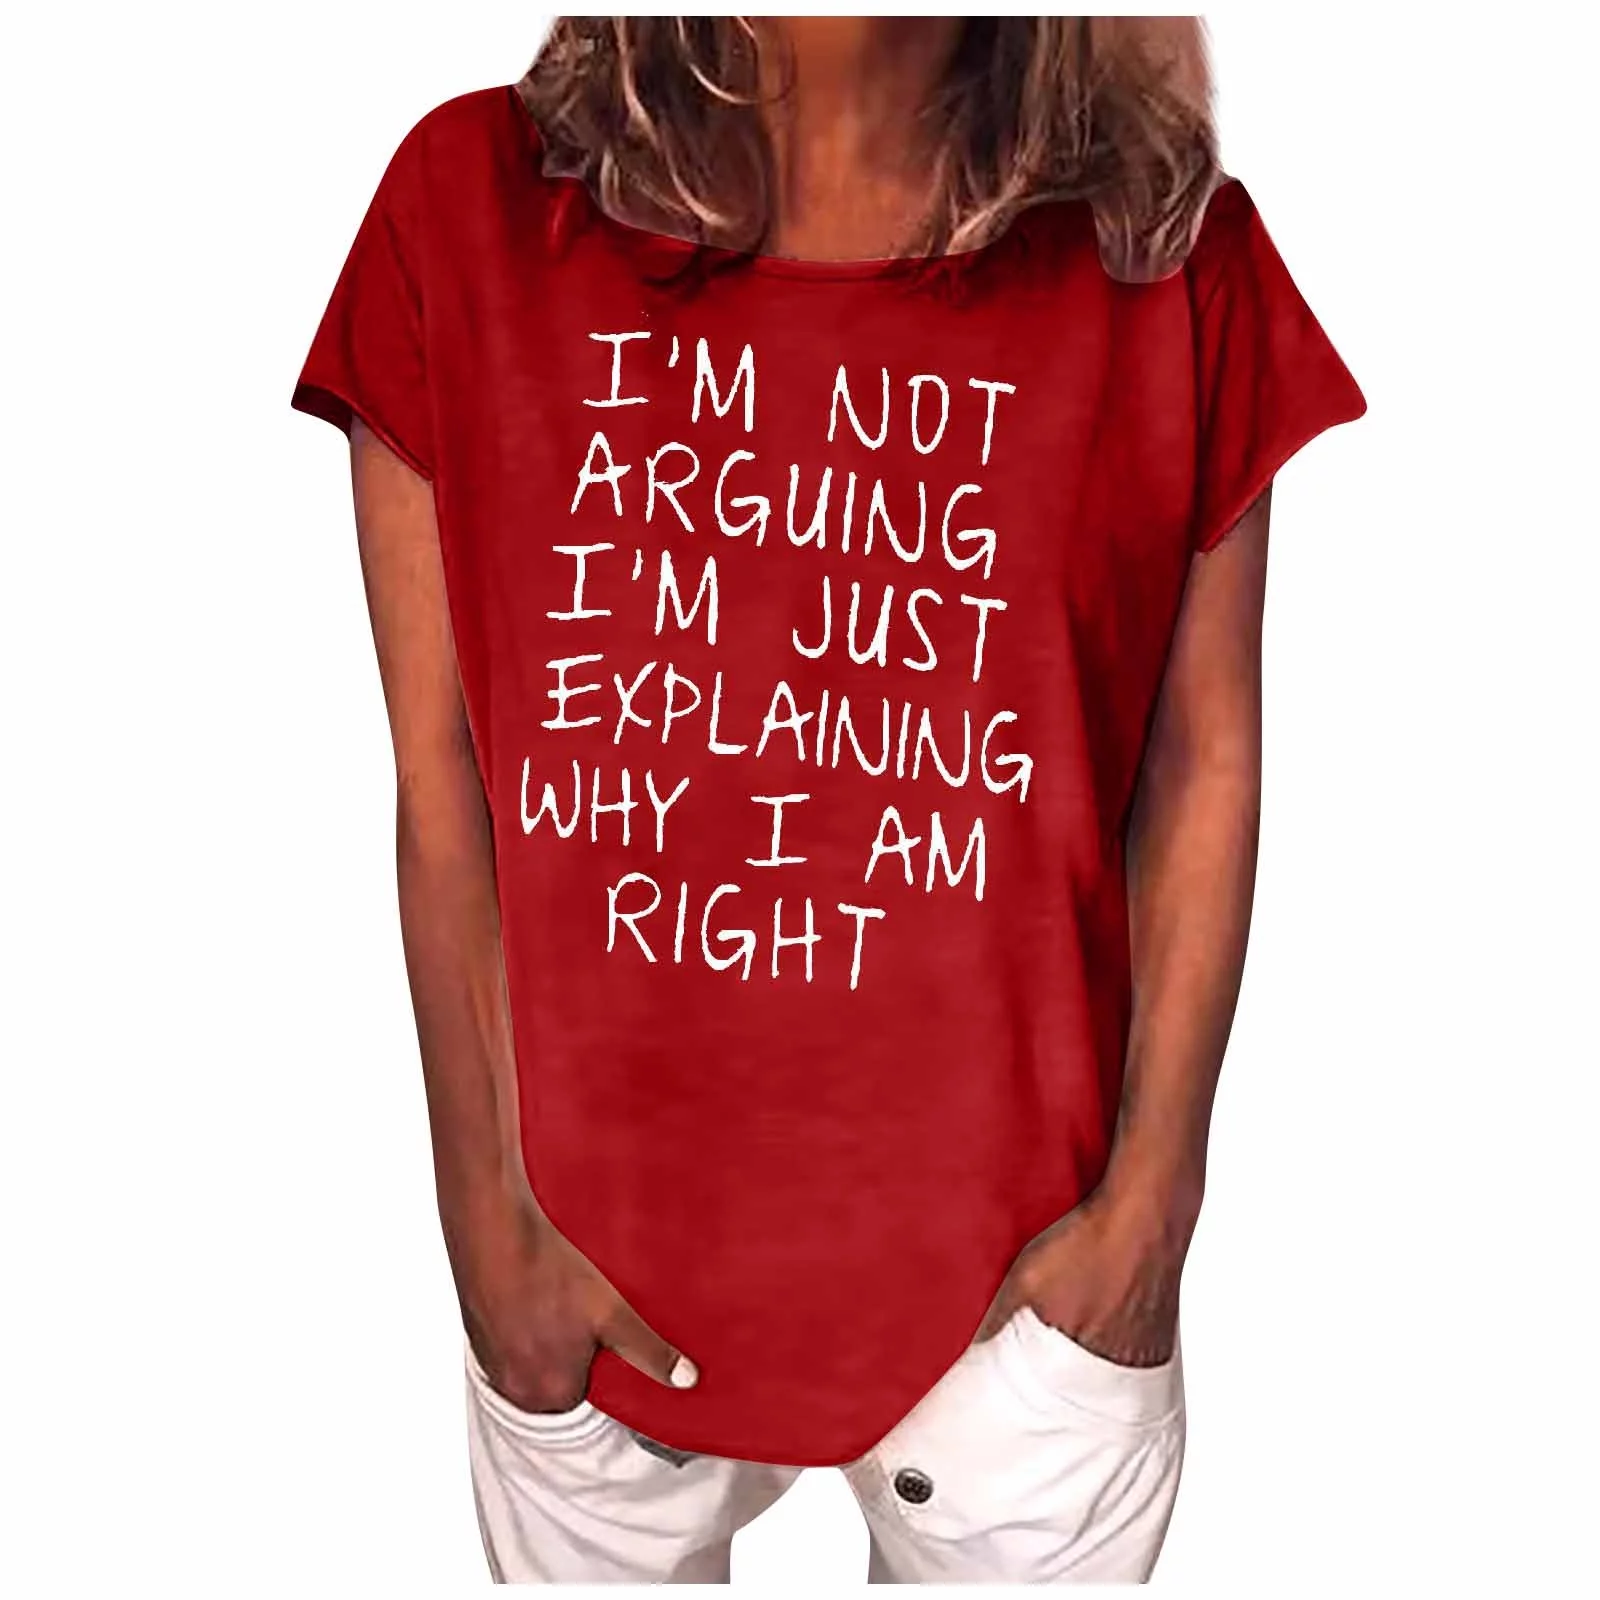 CYMMPU Short Sleeve Oversized Tees Clearance Women's Fashion Tops Retro Funny Letter Print Trendy Clothing Country Shirts Summer Tunic I'm Not Arguing Round Neck Tshirts Wine M